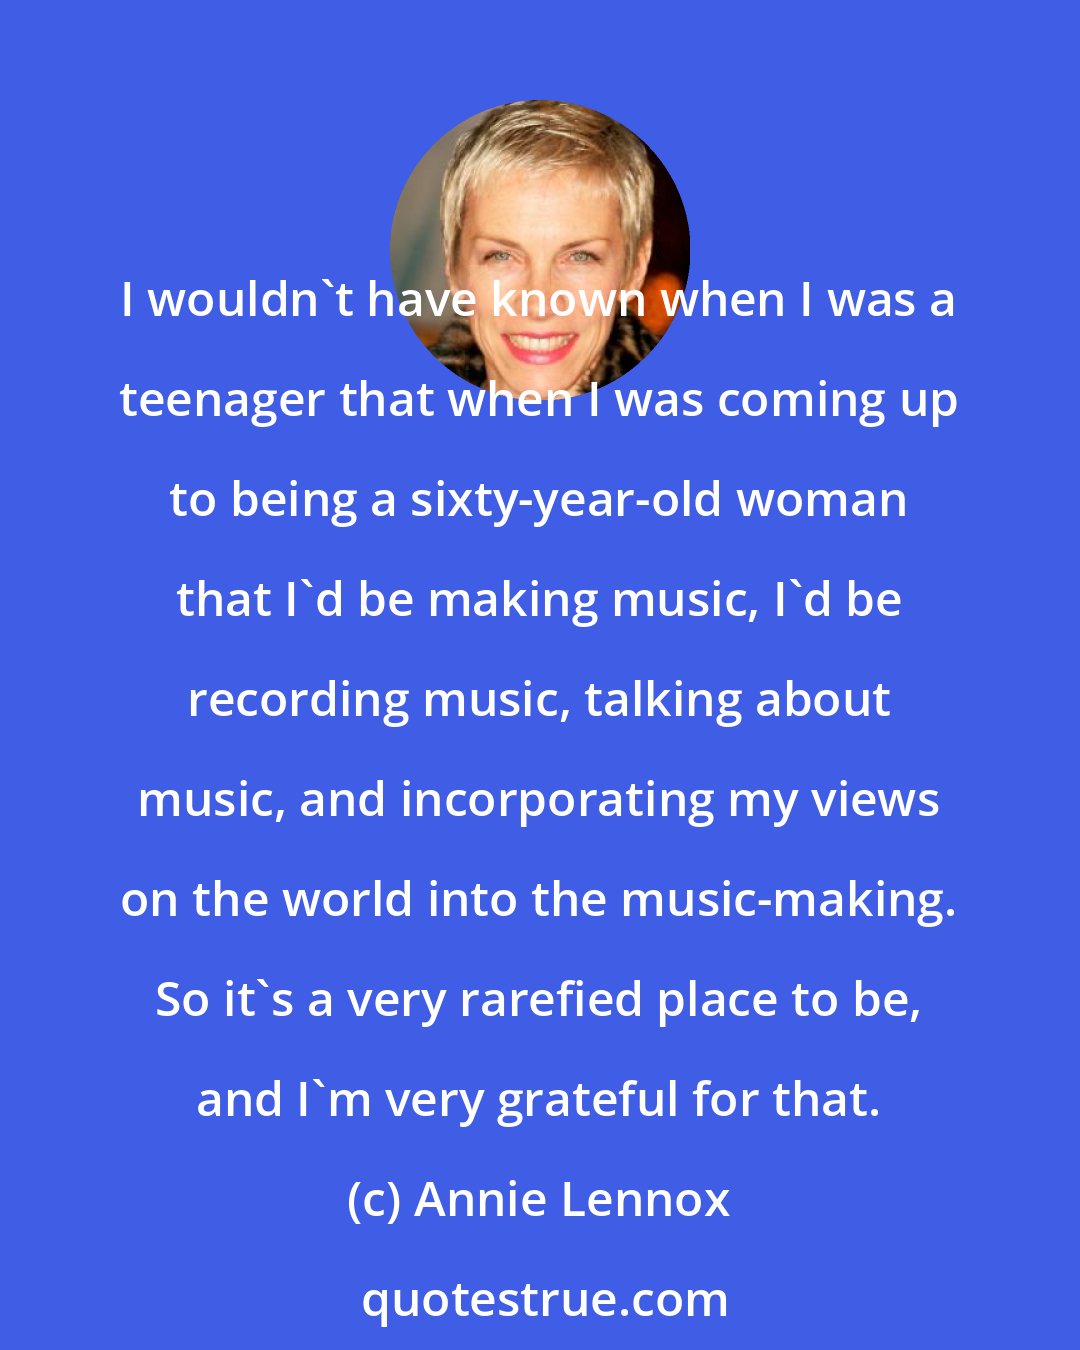 Annie Lennox: I wouldn't have known when I was a teenager that when I was coming up to being a sixty-year-old woman that I'd be making music, I'd be recording music, talking about music, and incorporating my views on the world into the music-making. So it's a very rarefied place to be, and I'm very grateful for that.